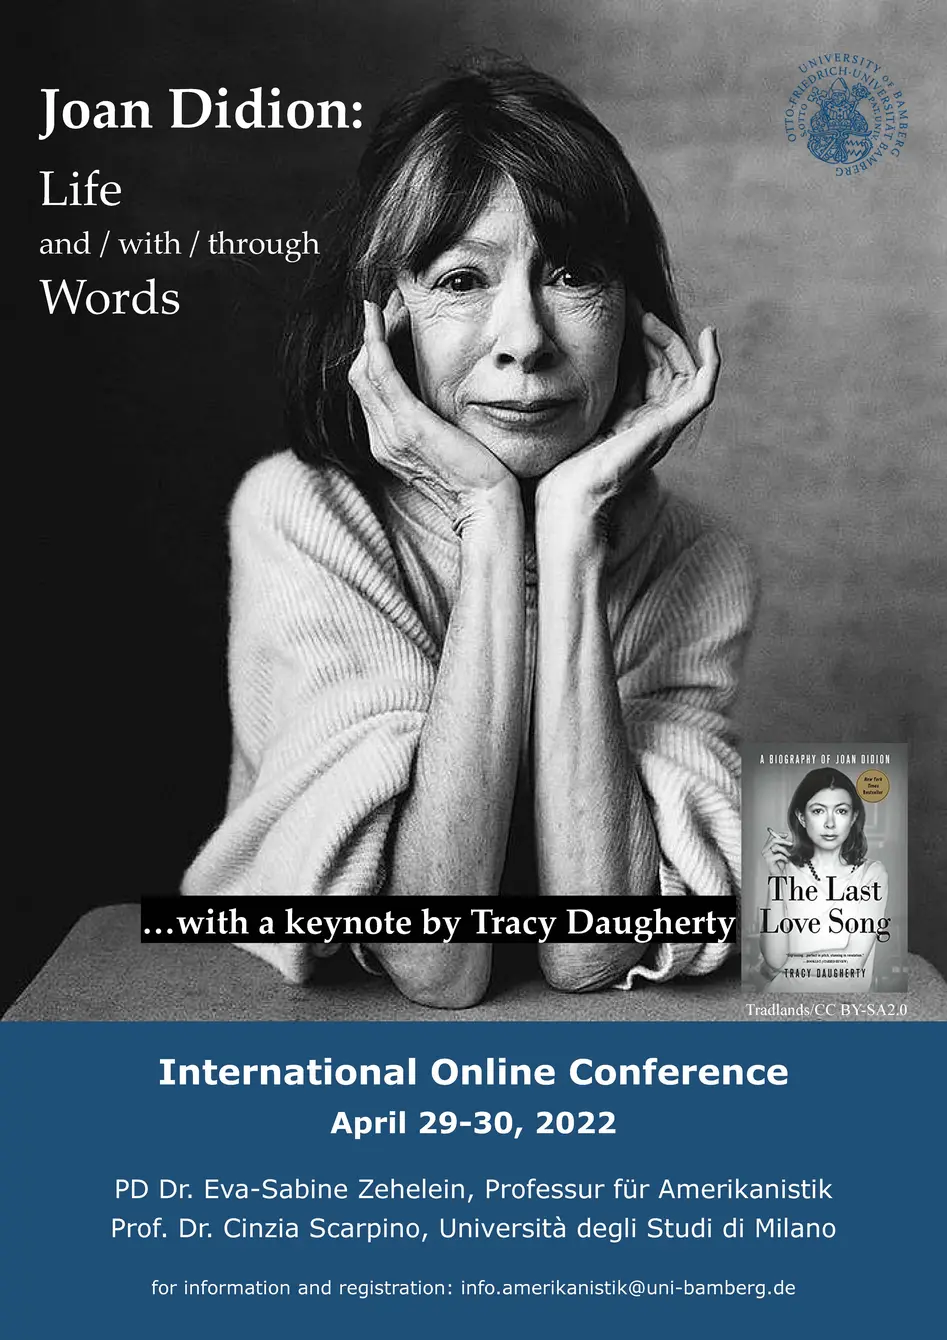 A poster for the conference "Joan Didion: Life and / with / through Words". The poster shows a black and white photo of Joan Didion with her head resting on her hands. Aside from the conference title, the text on the poster says: "...…with a keynote by Tracy Daugherty" and "International Online Conference, April 29-30, 2022". The conference is organized by PD Dr. Eva-Sabine Zehelein, Professur für Amerikanistik Prof. Dr. Cinzia Scarpino, Università degli Studi di Milano for information and registration: info.amerikanistik@uni-bamberg.de